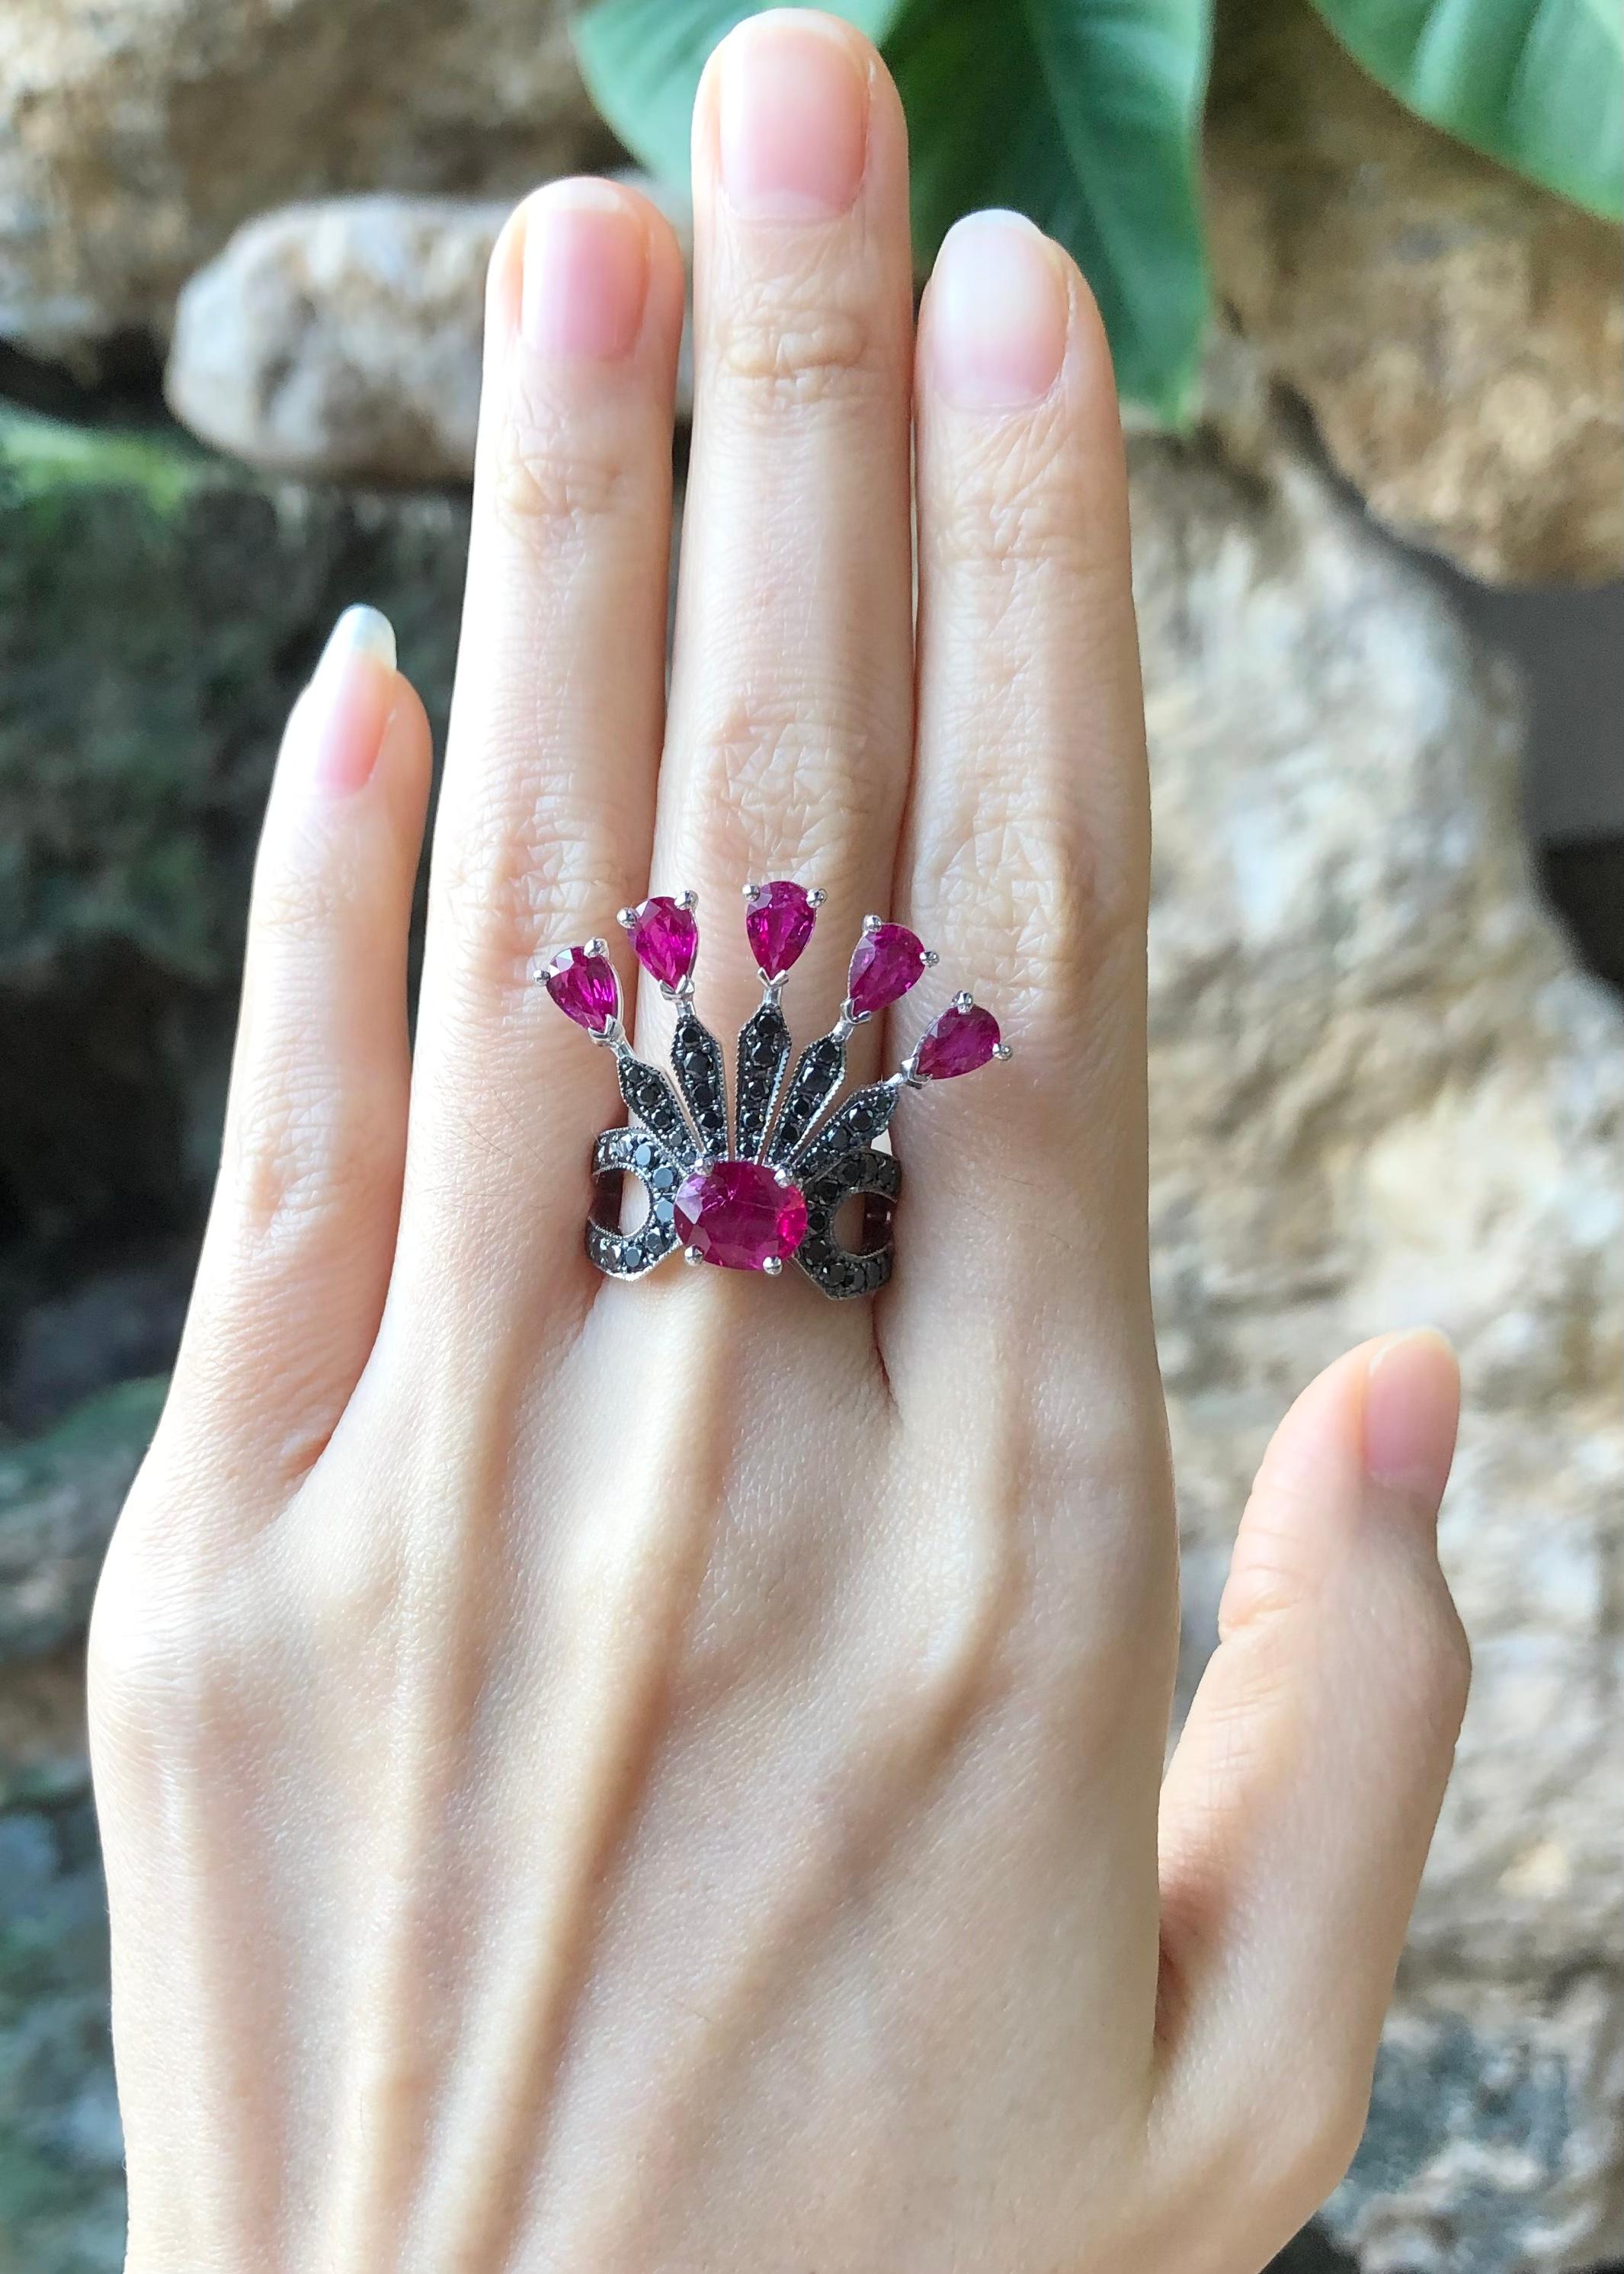 Ruby 1.85 carats, Ruby 5.45 carats and Black Diamond 1.01 carats Ring set in 18 Karat White Gold Settings

Width:  3.0 cm 
Length: 2.7 cm
Ring Size: 53
Total Weight: 12.23 grams


